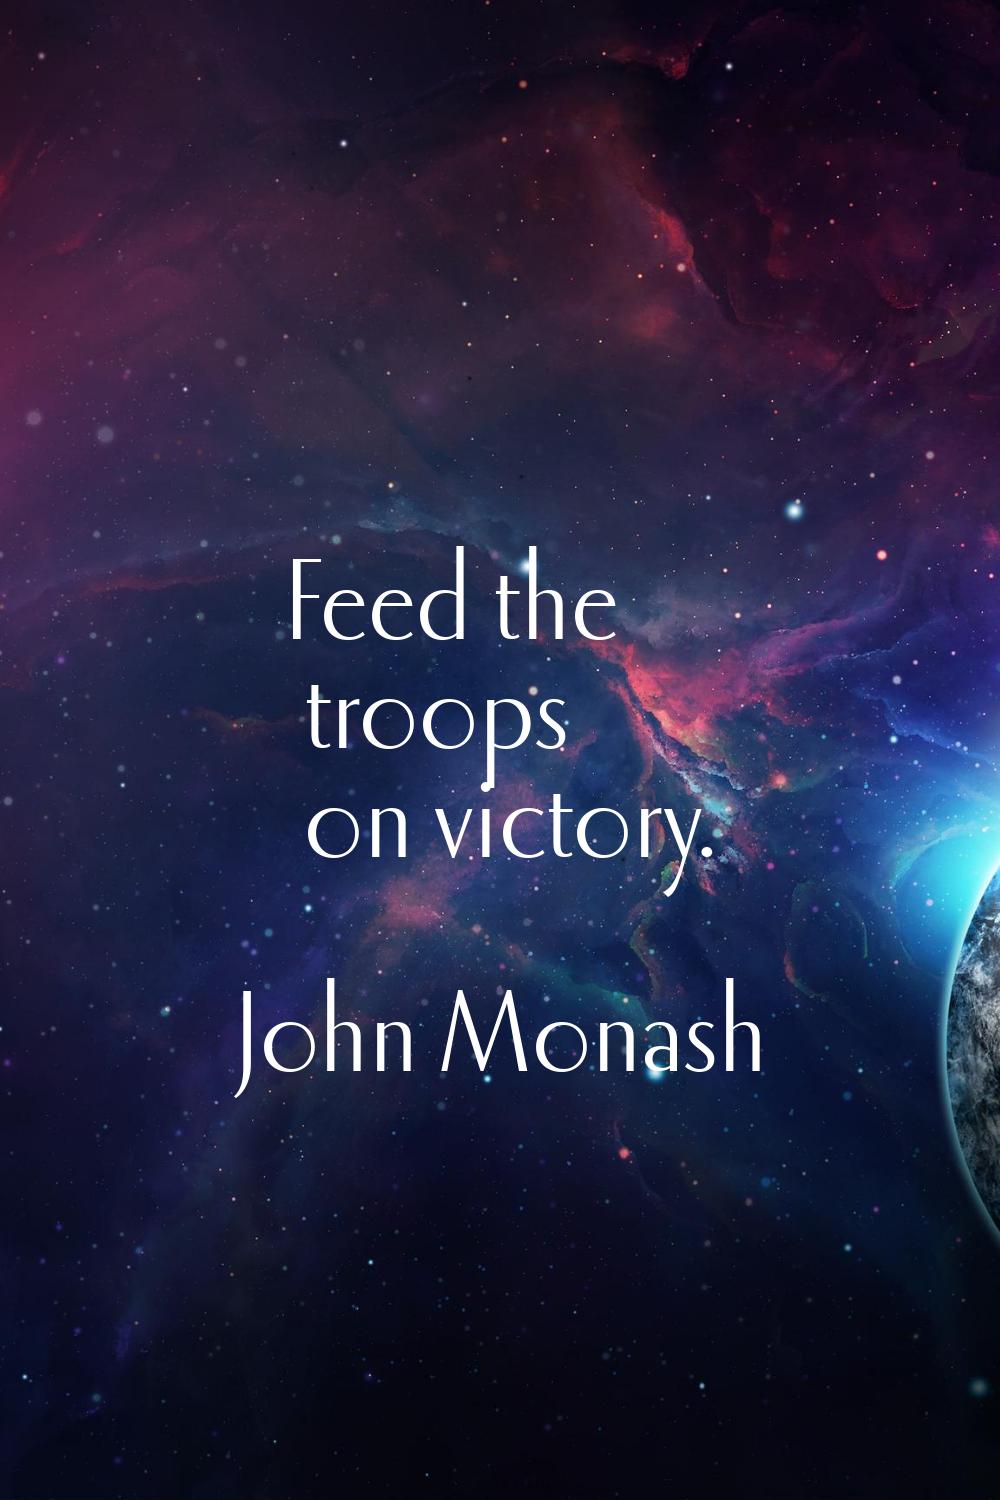 Feed the troops on victory.